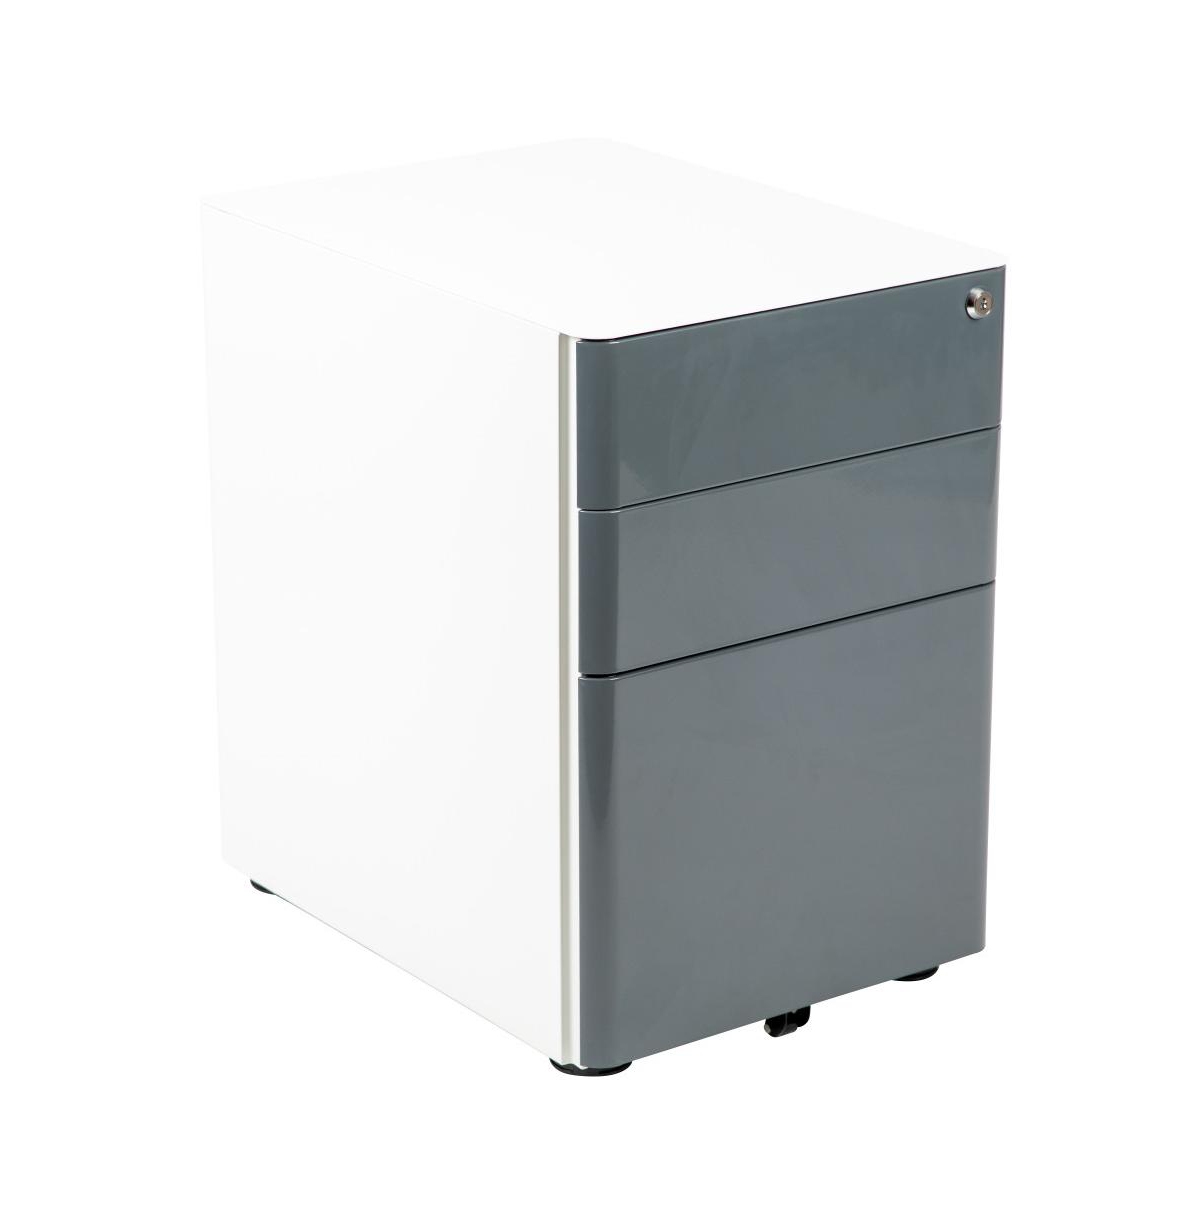 Emma+oliver Modern 3-drawer Mobile Locking Filing Cabinet Storage Organizer In White And Charcoal